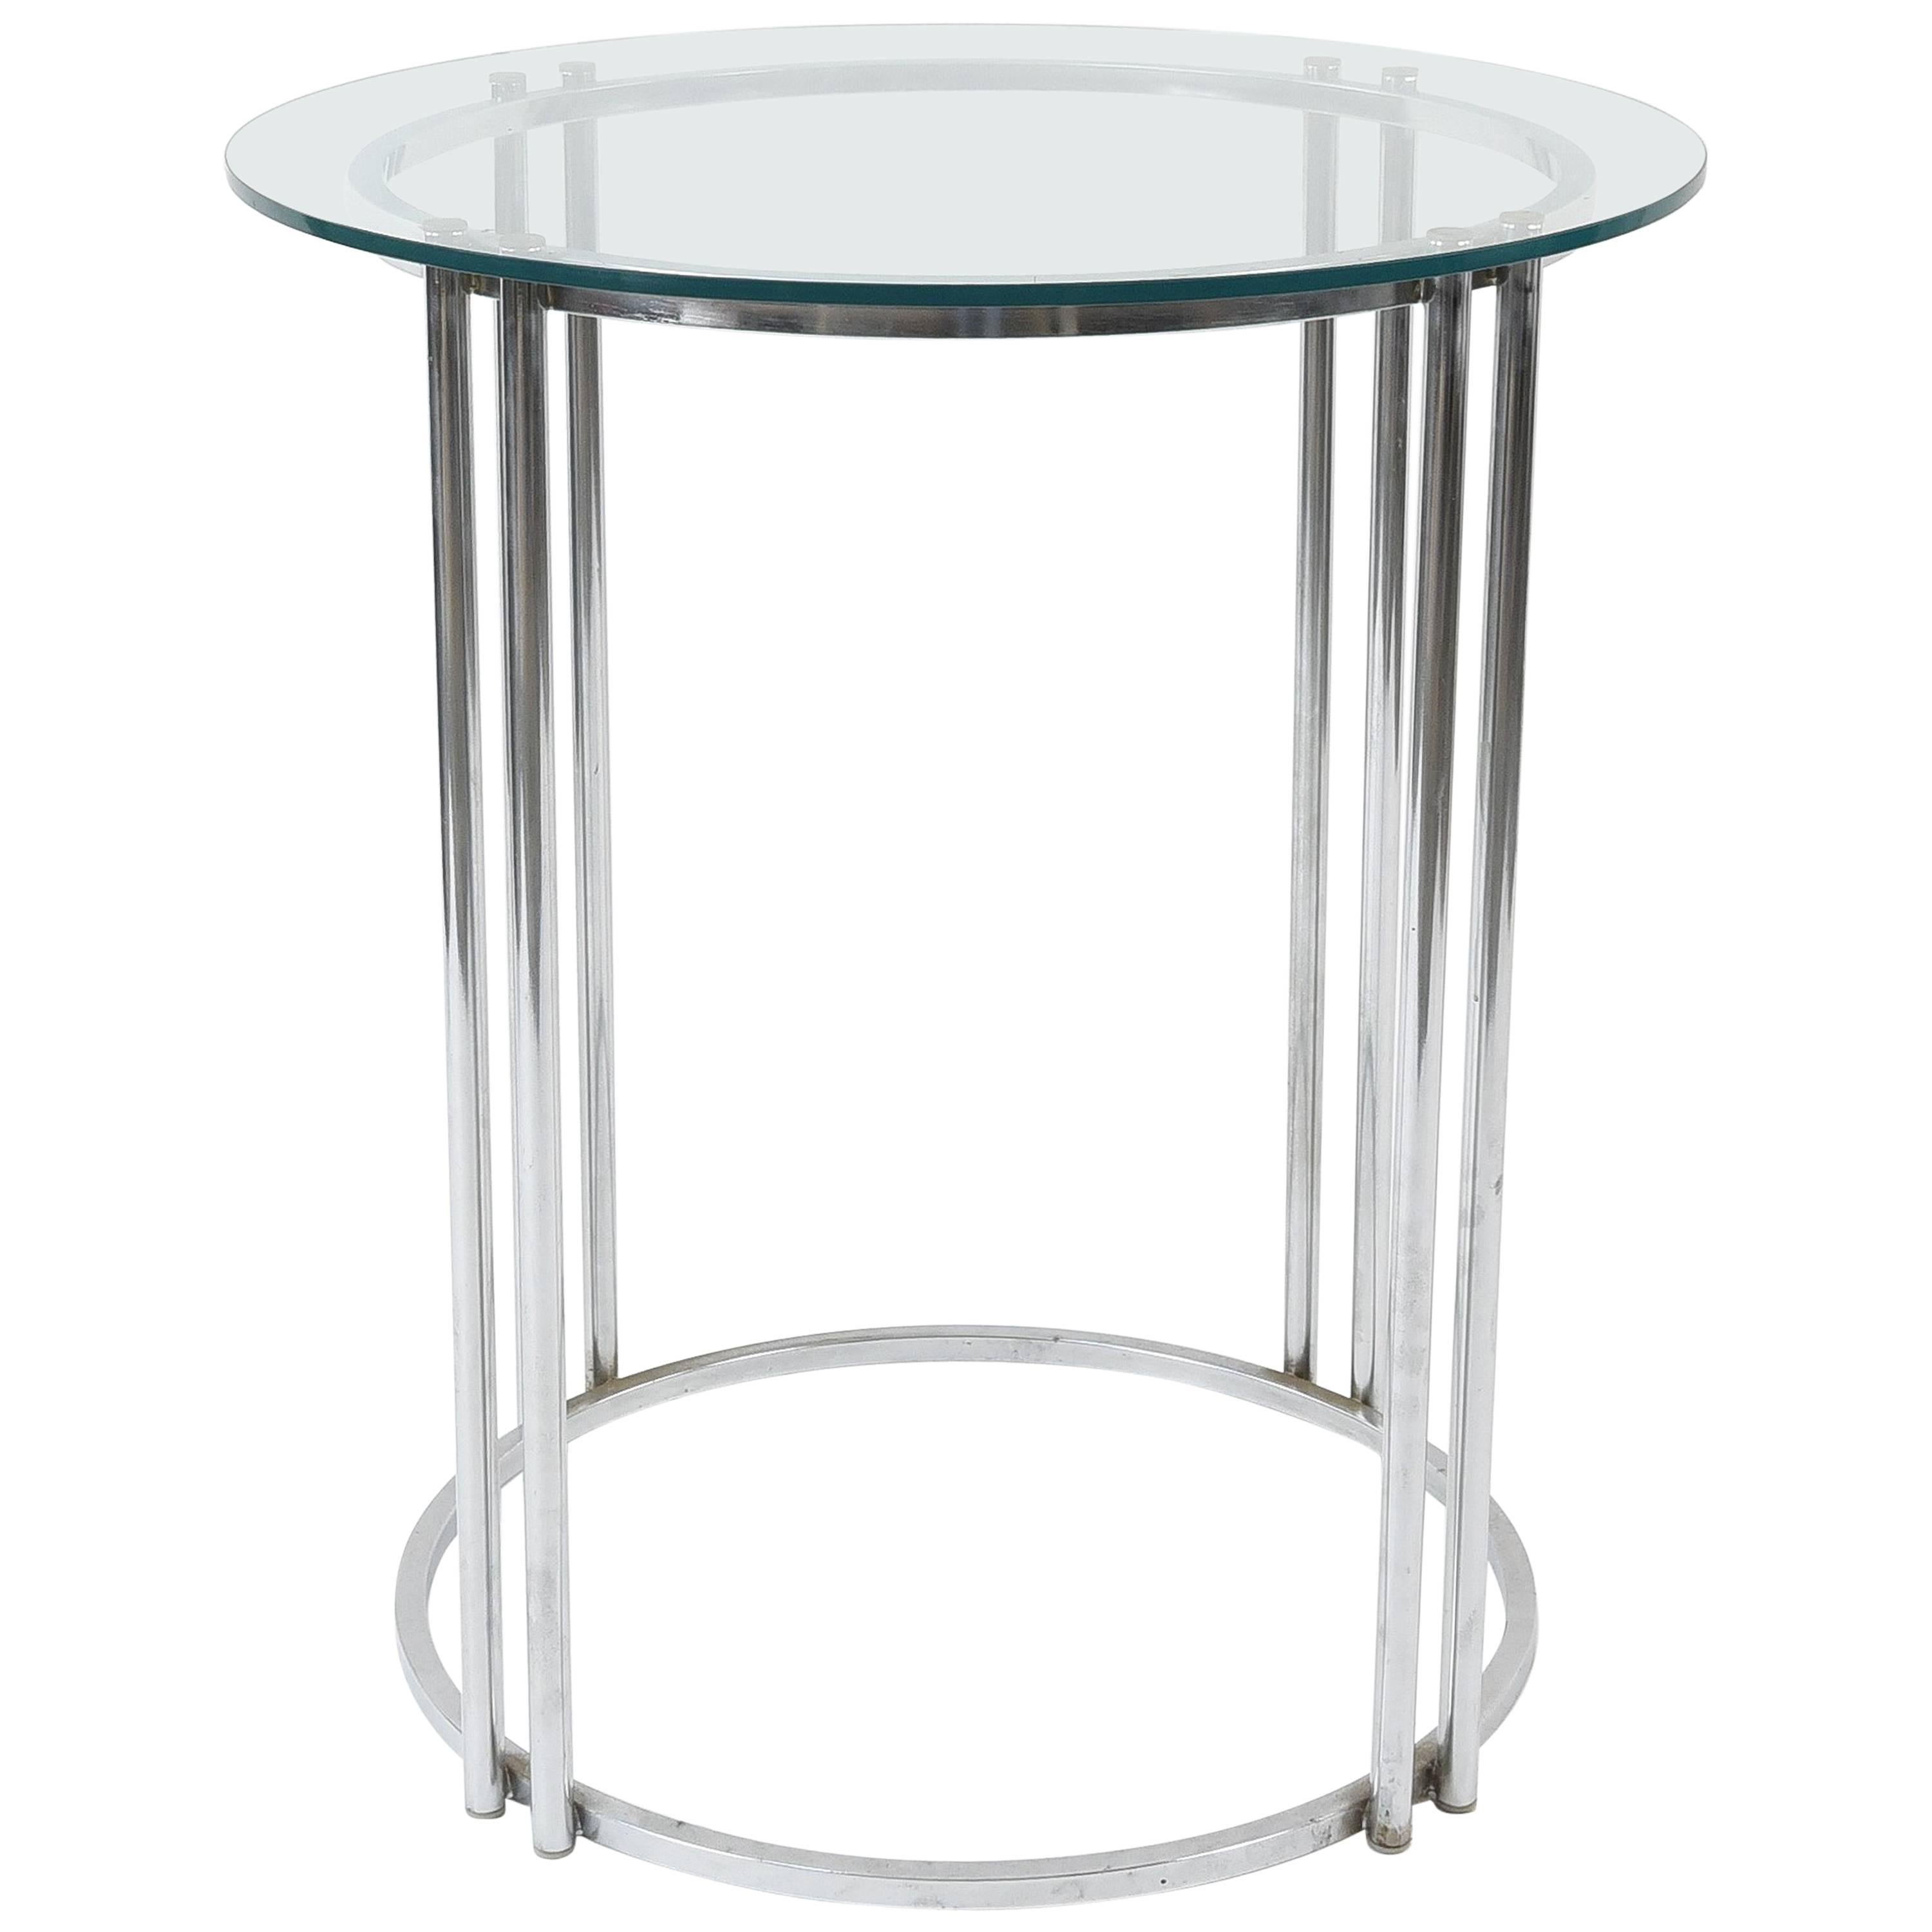 Chromed Steel and Glass Cocktail or display table